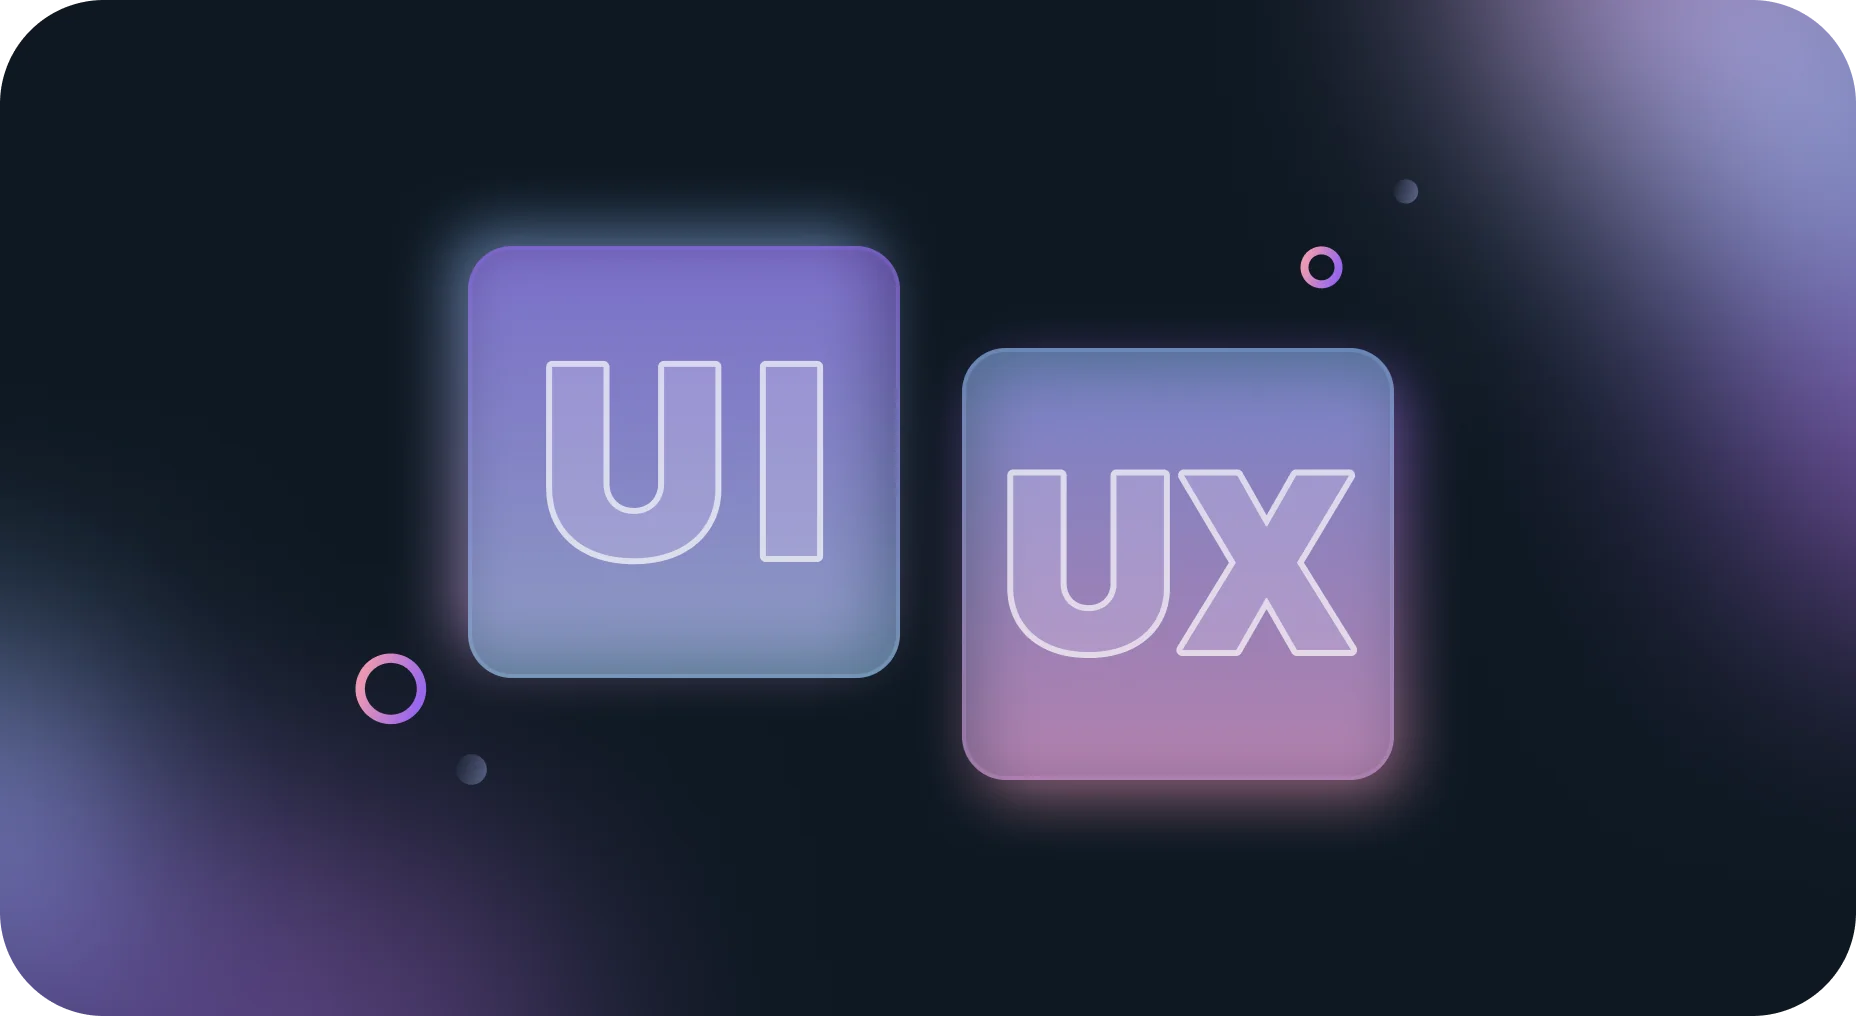 Devtorium UI/UX Design Services: What We Can Do for You